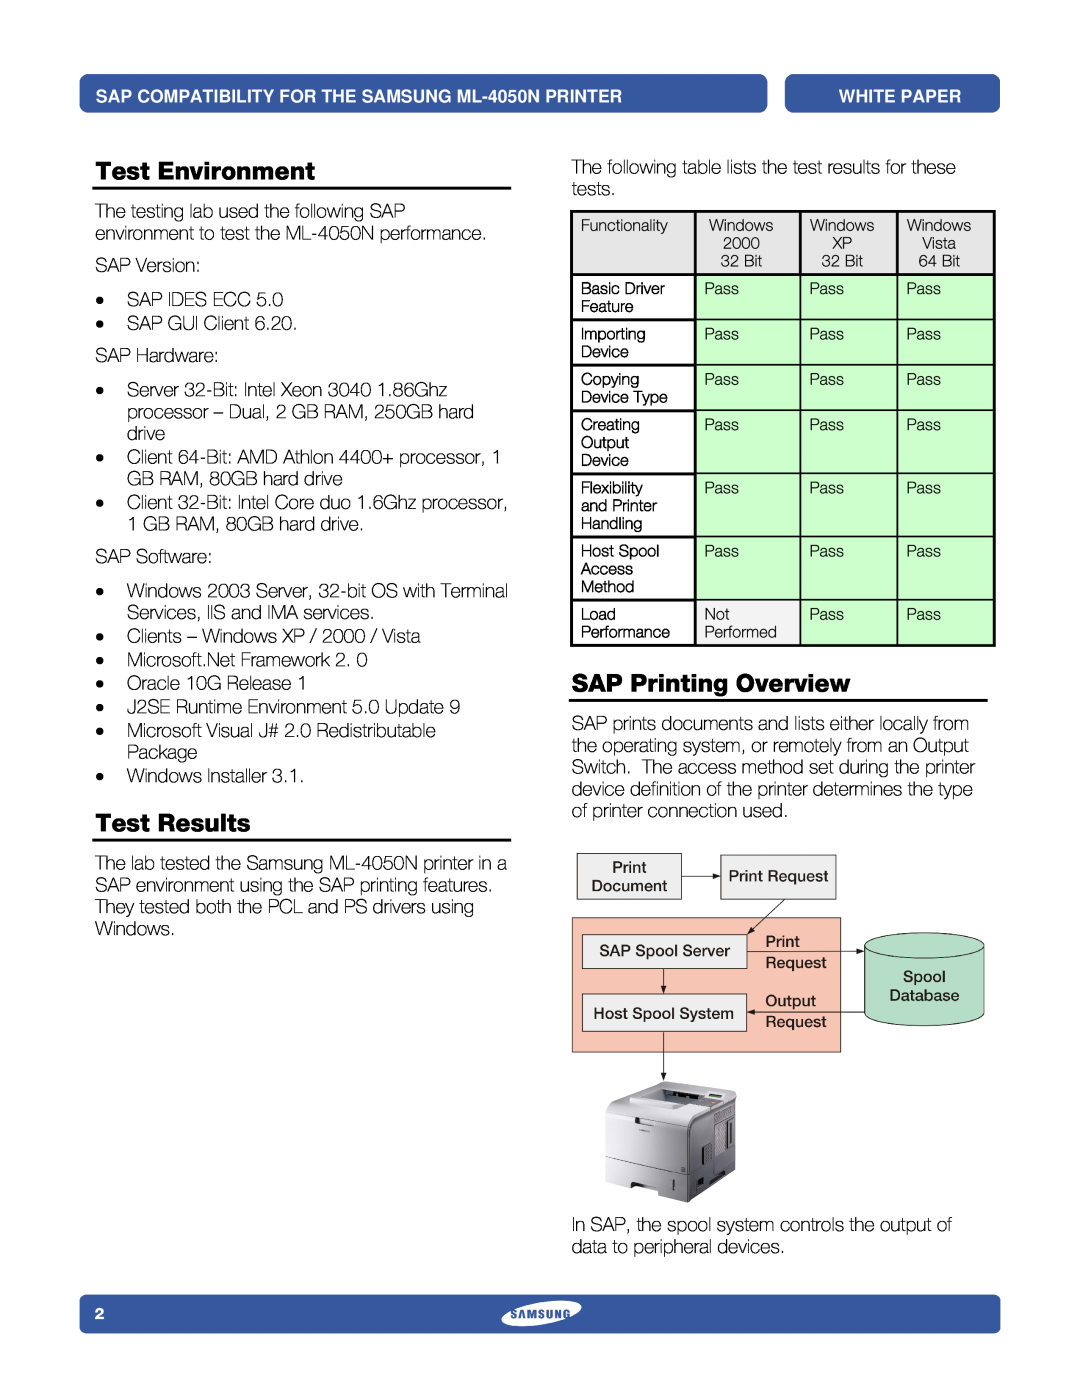 Samsung 4050N specifications Test Environment, Test Results, SAP Printing Overview 